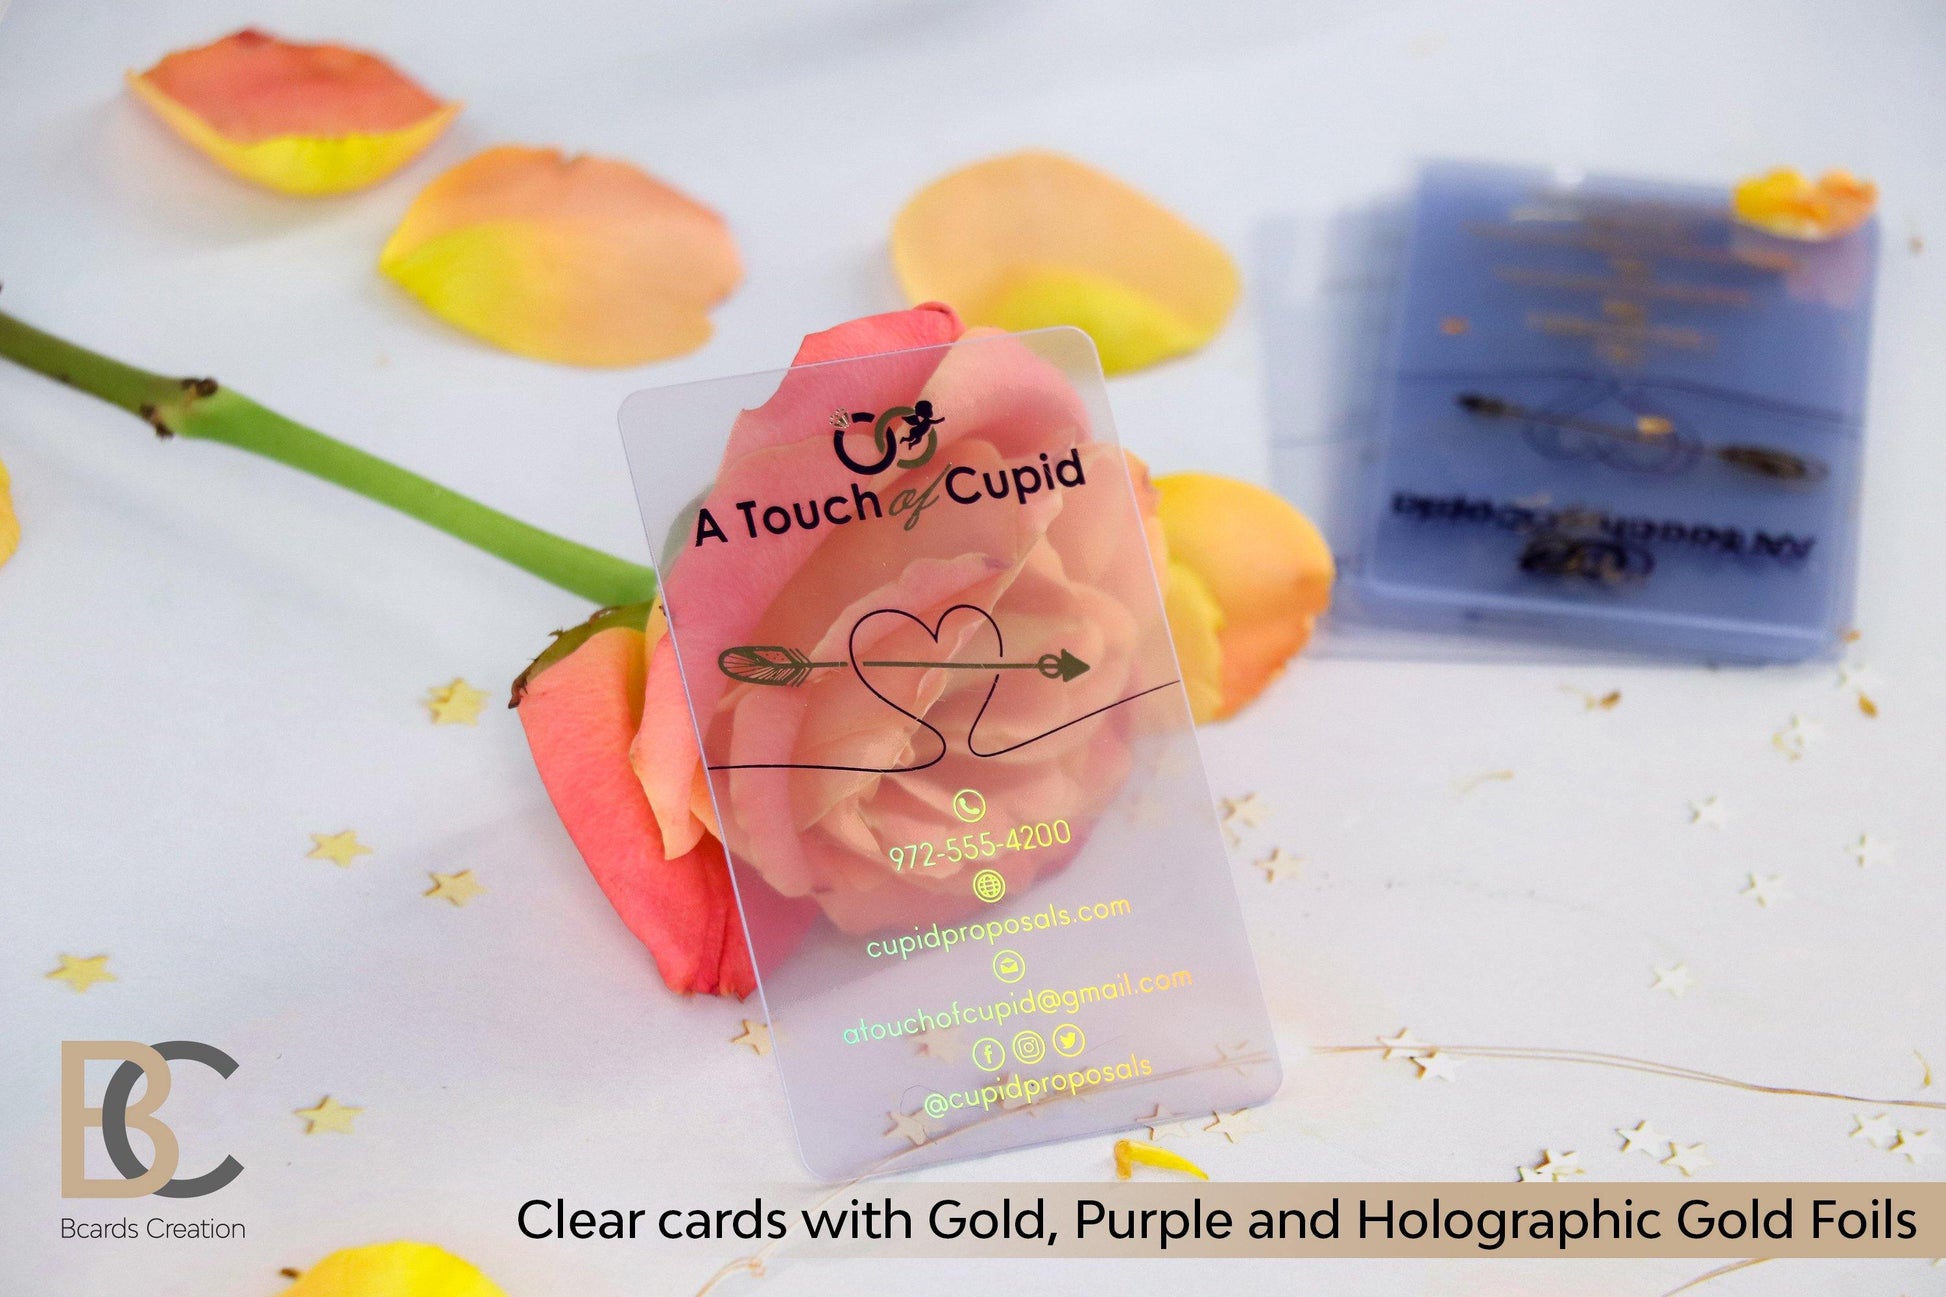 Glossy Transparent Plastic Cards | Clear Business Cards | Gold, Pink, White Foils BcardsCreation